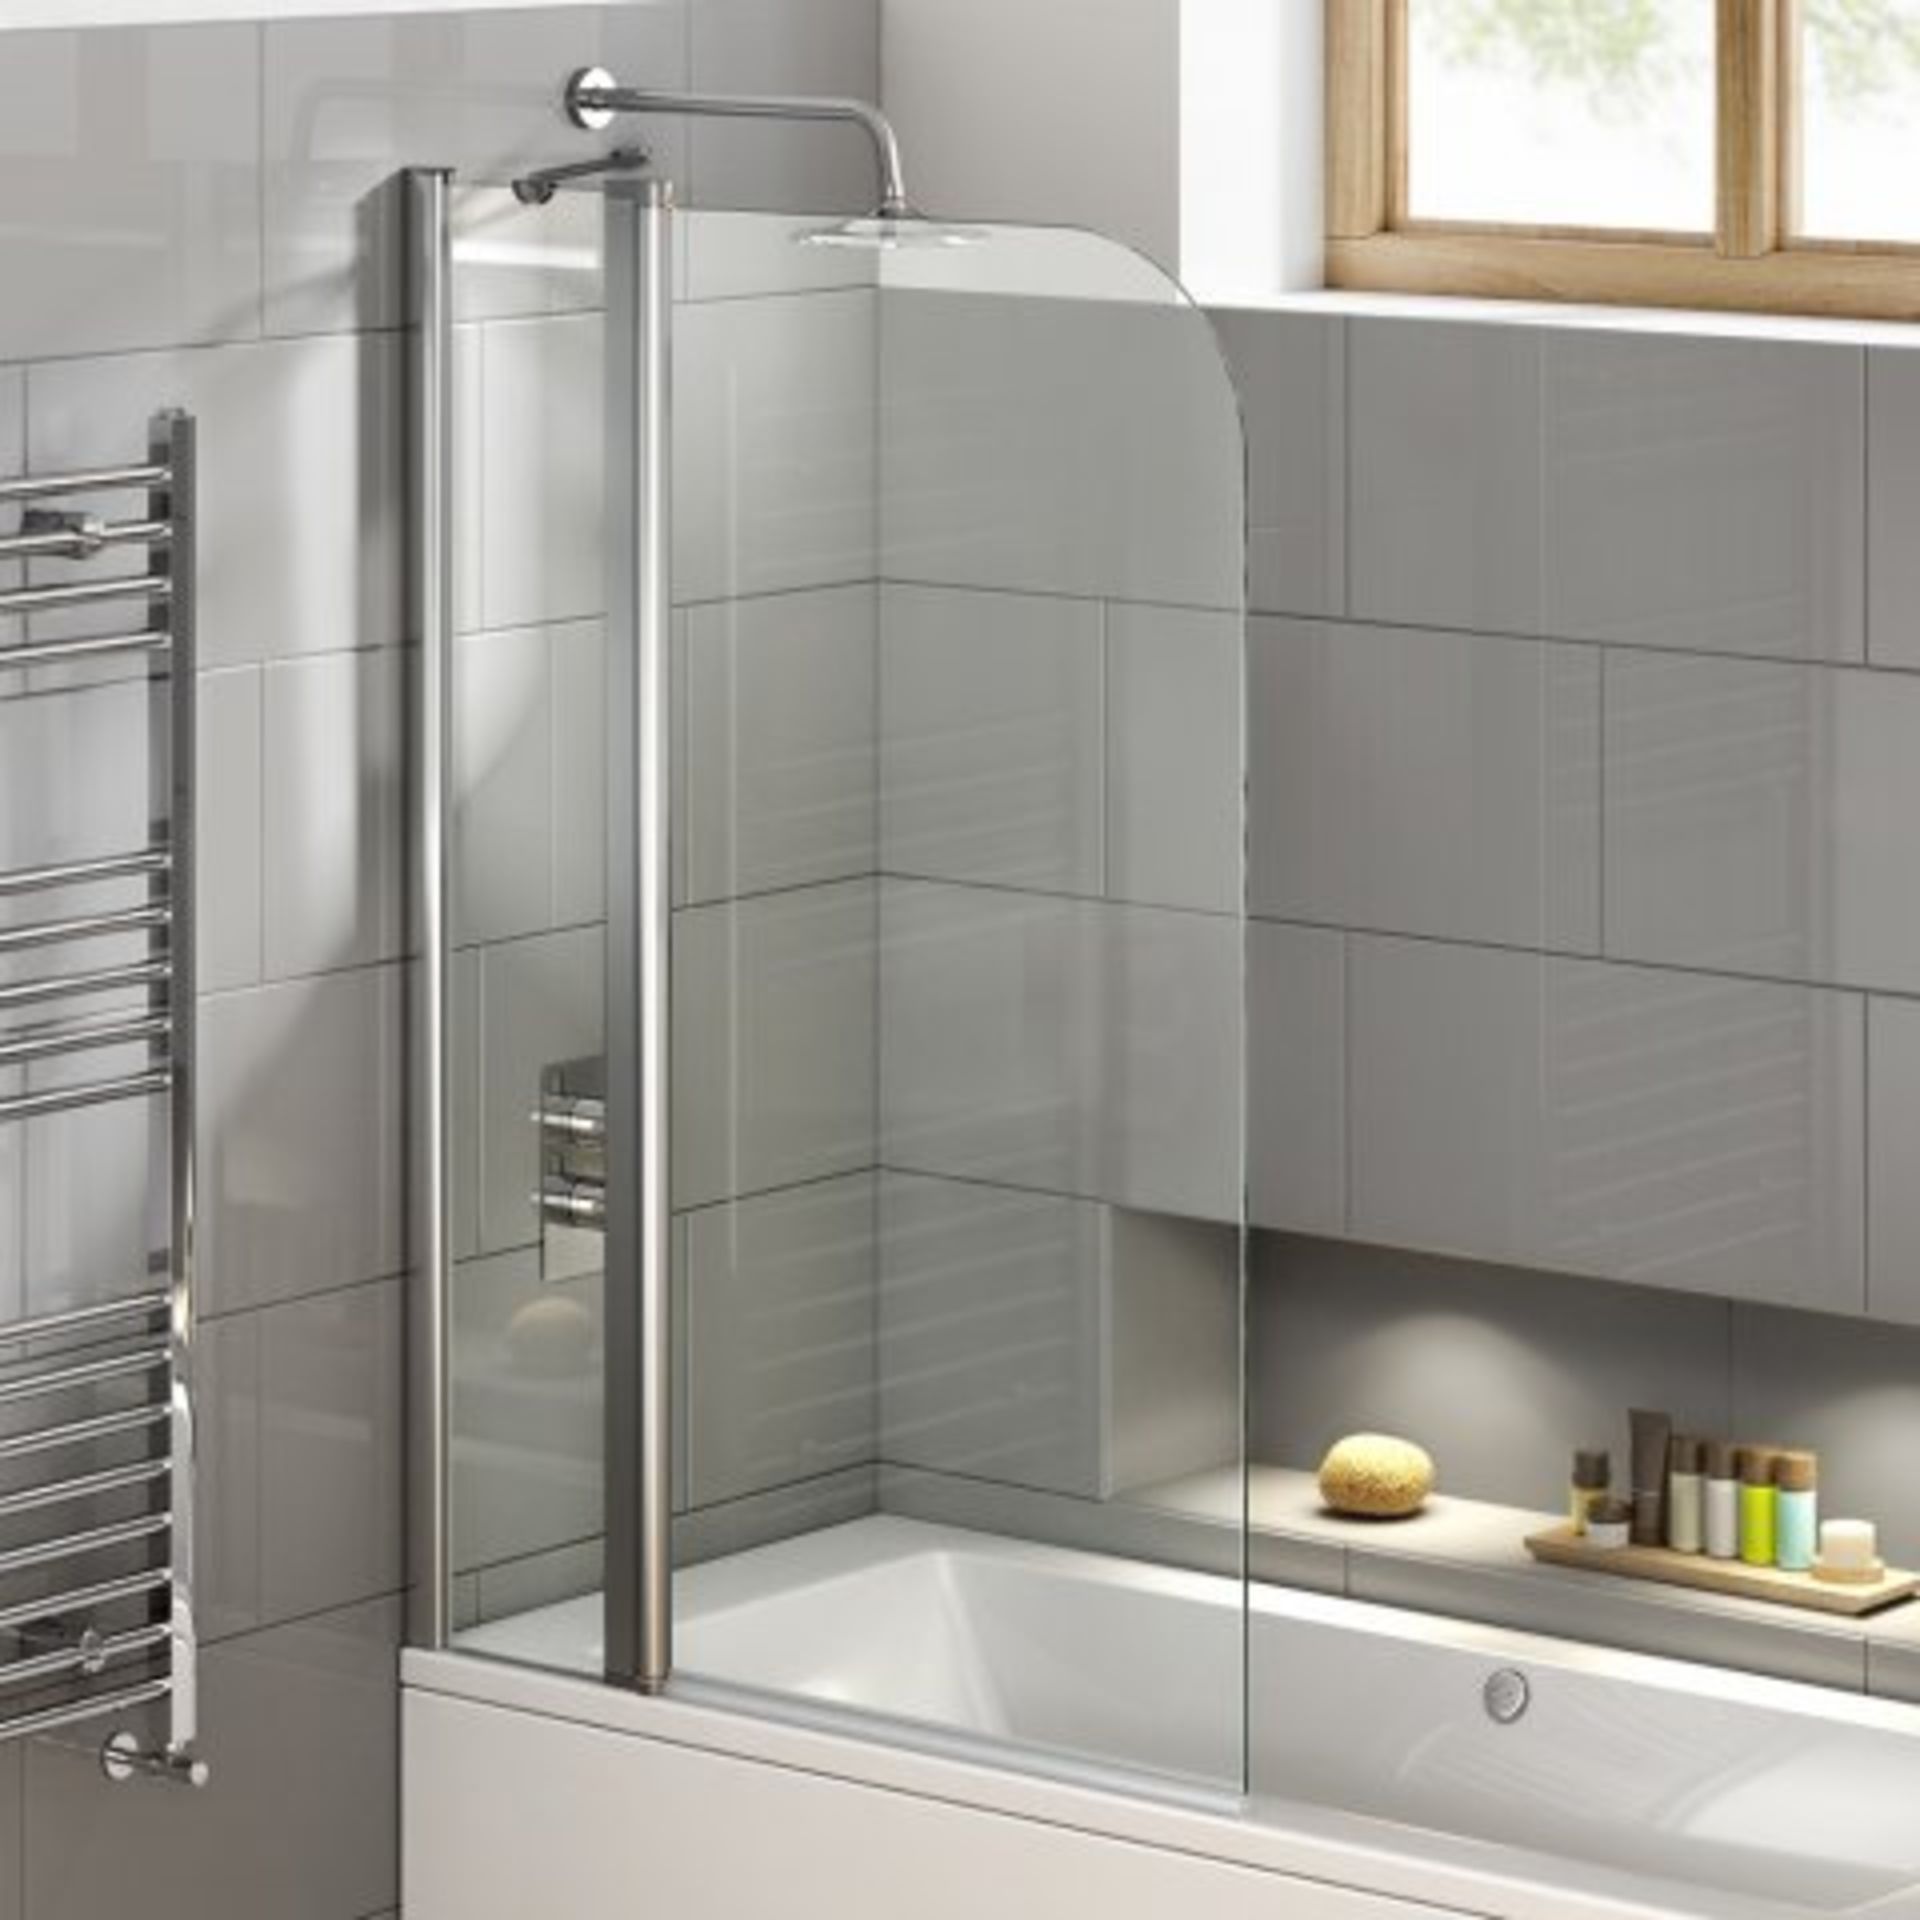 (H132) 1000mm - 6mm - EasyClean Straight Bath Screen. RRP £224.99. The clue is in the name: Easy - Bild 2 aus 4